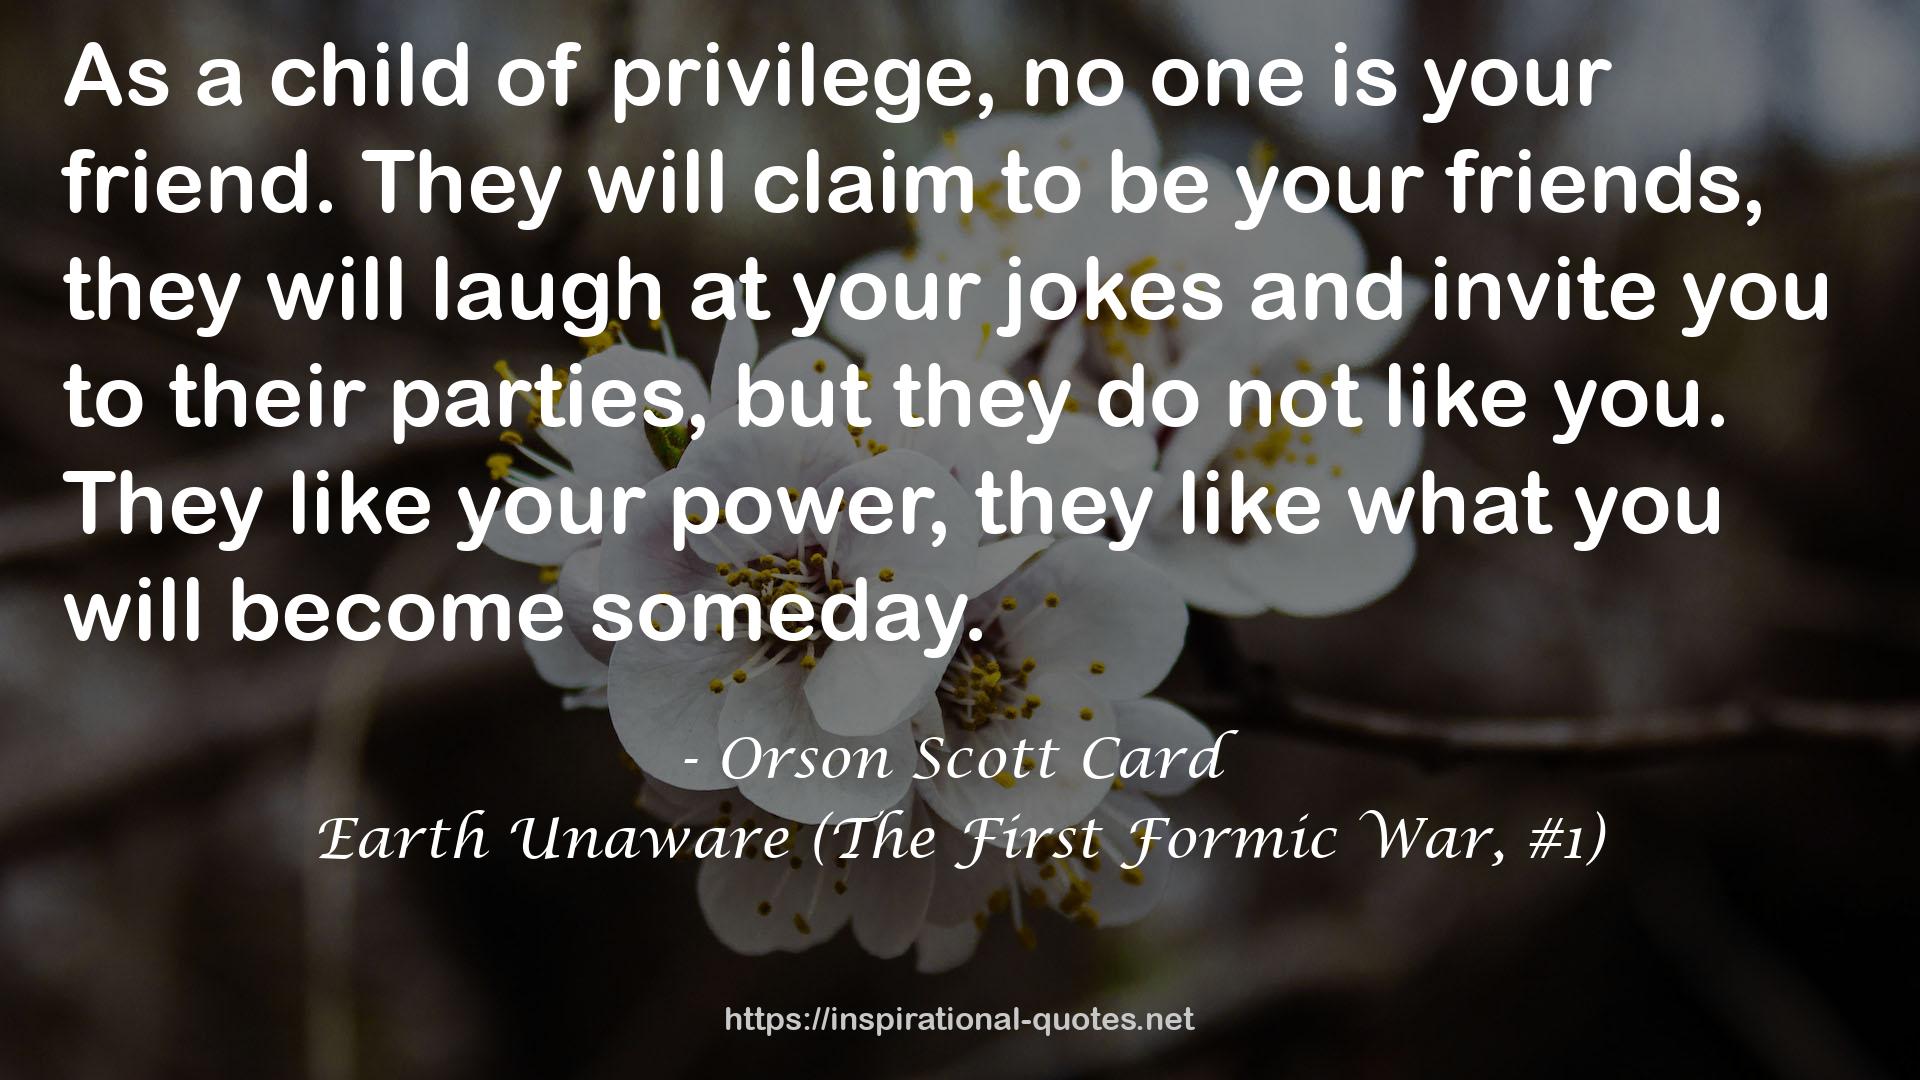 Earth Unaware (The First Formic War, #1) QUOTES